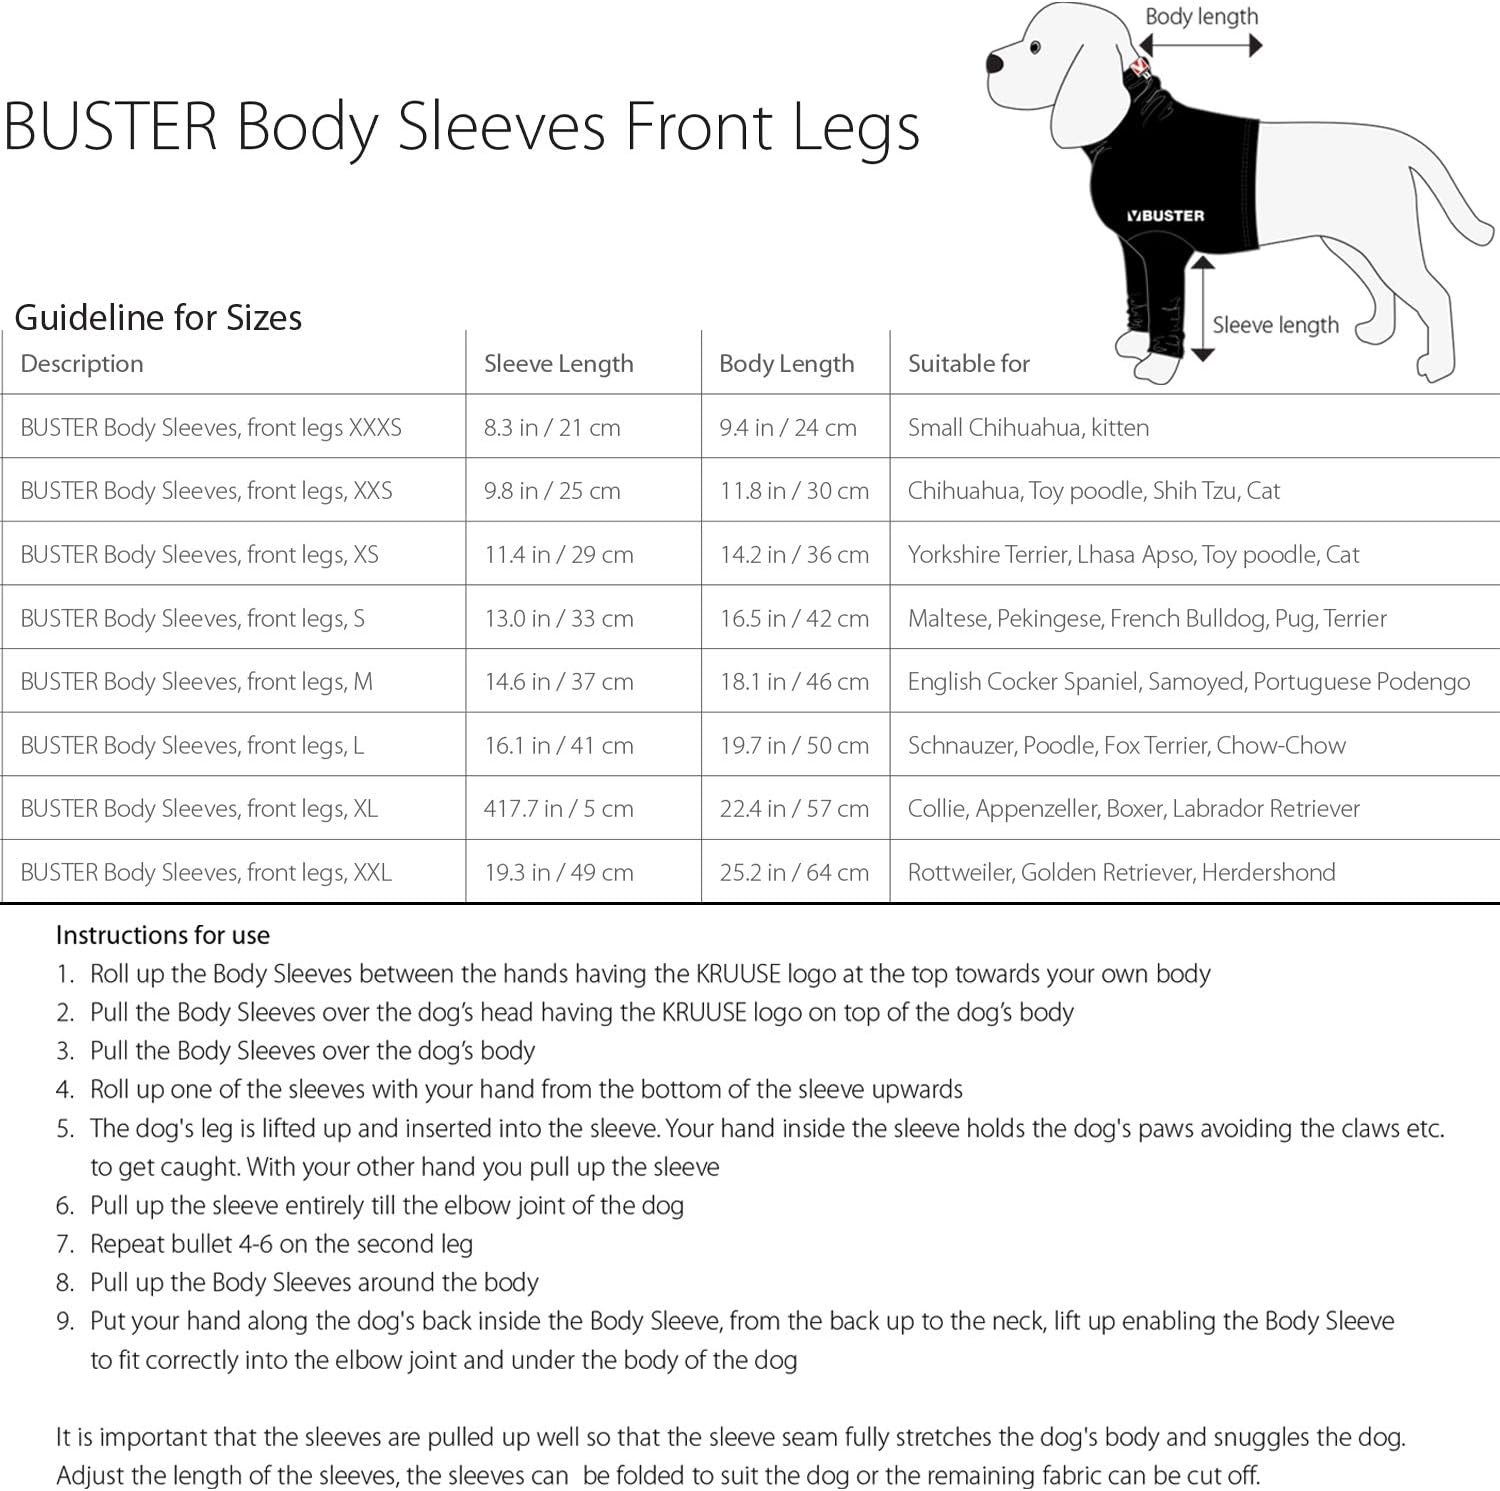 Buster Body Sleeve Front Legs